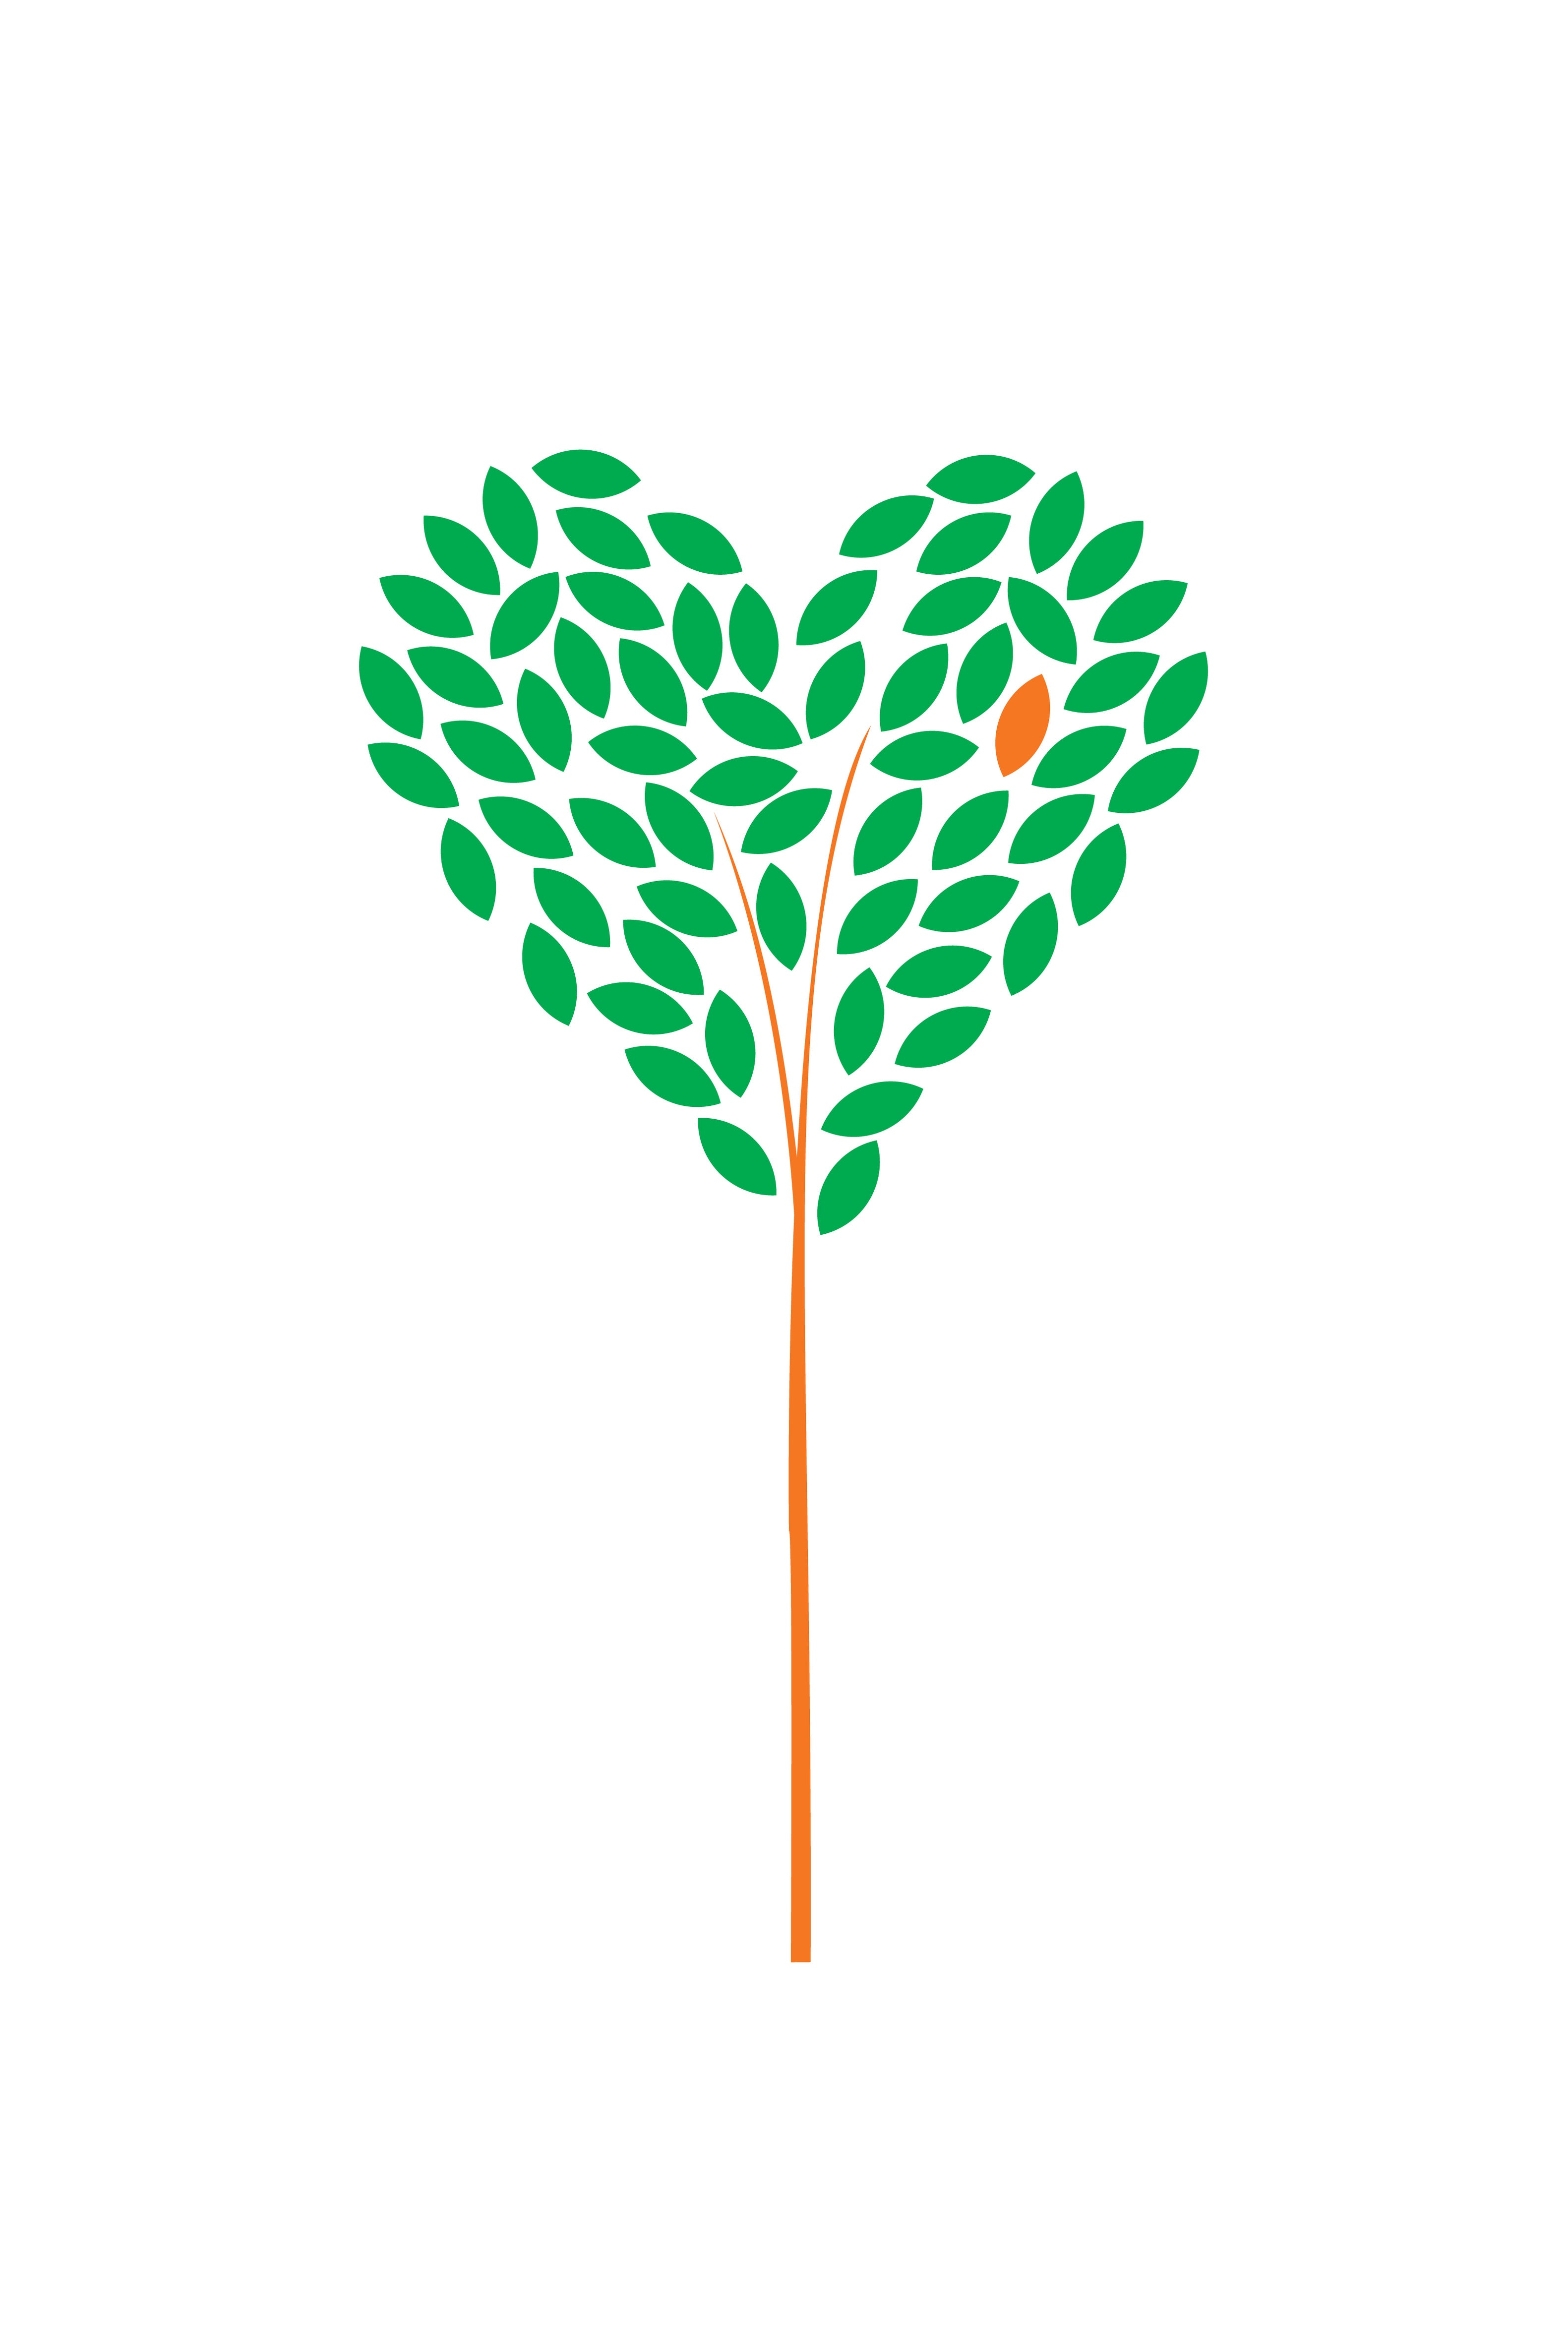 Illustration of a tree in the shape of a heart